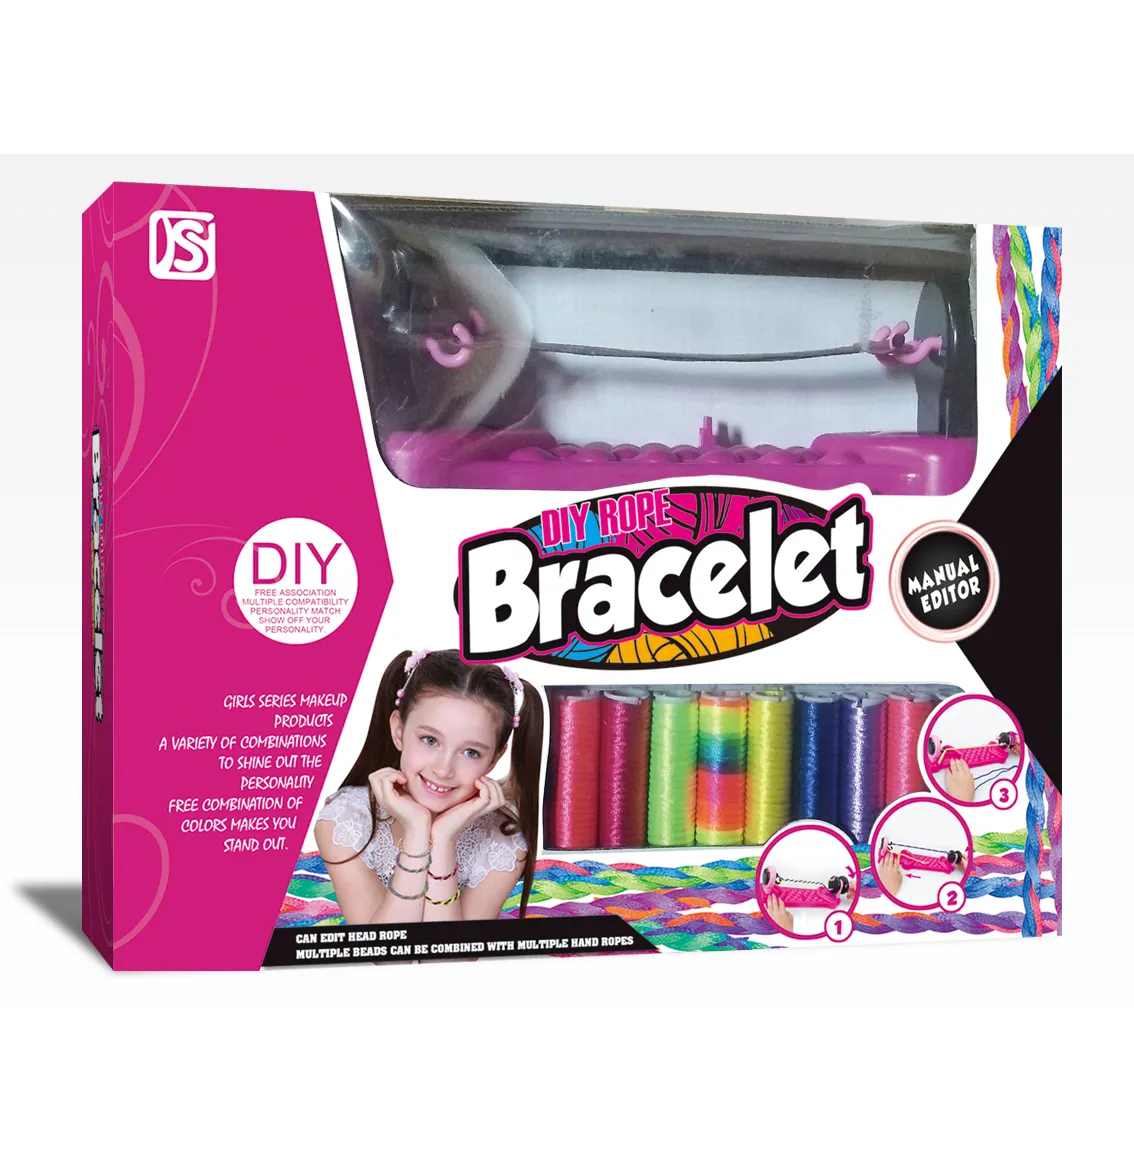 Kids DIY Arts and Crafts Bracelet Making Kit Best Toy for Girls Birthday Gifts Charm Jewelry Making String Sets